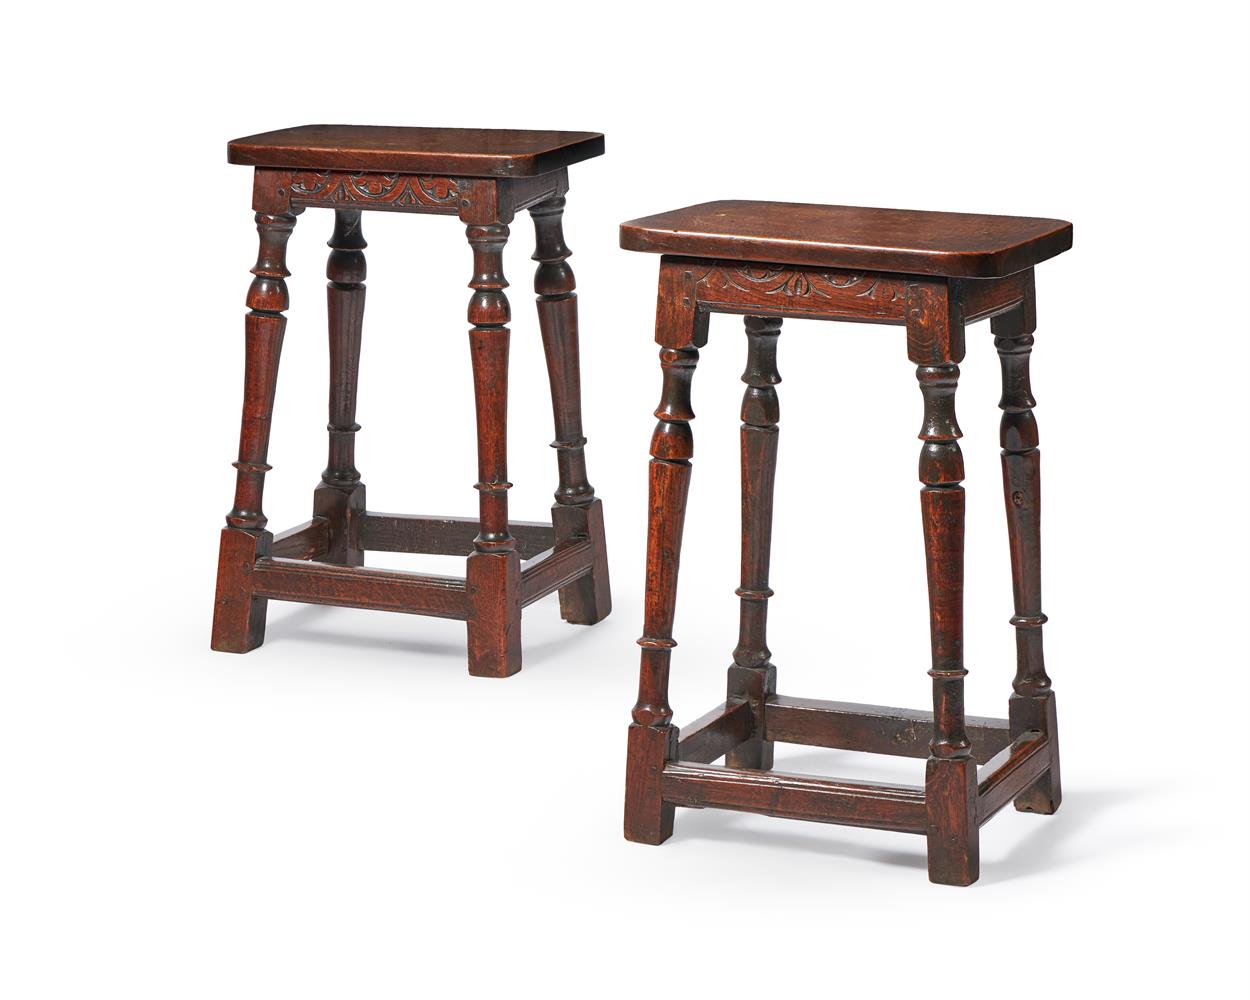 A PAIR OF OAK JOINT STOOLS, 18TH CENTURY